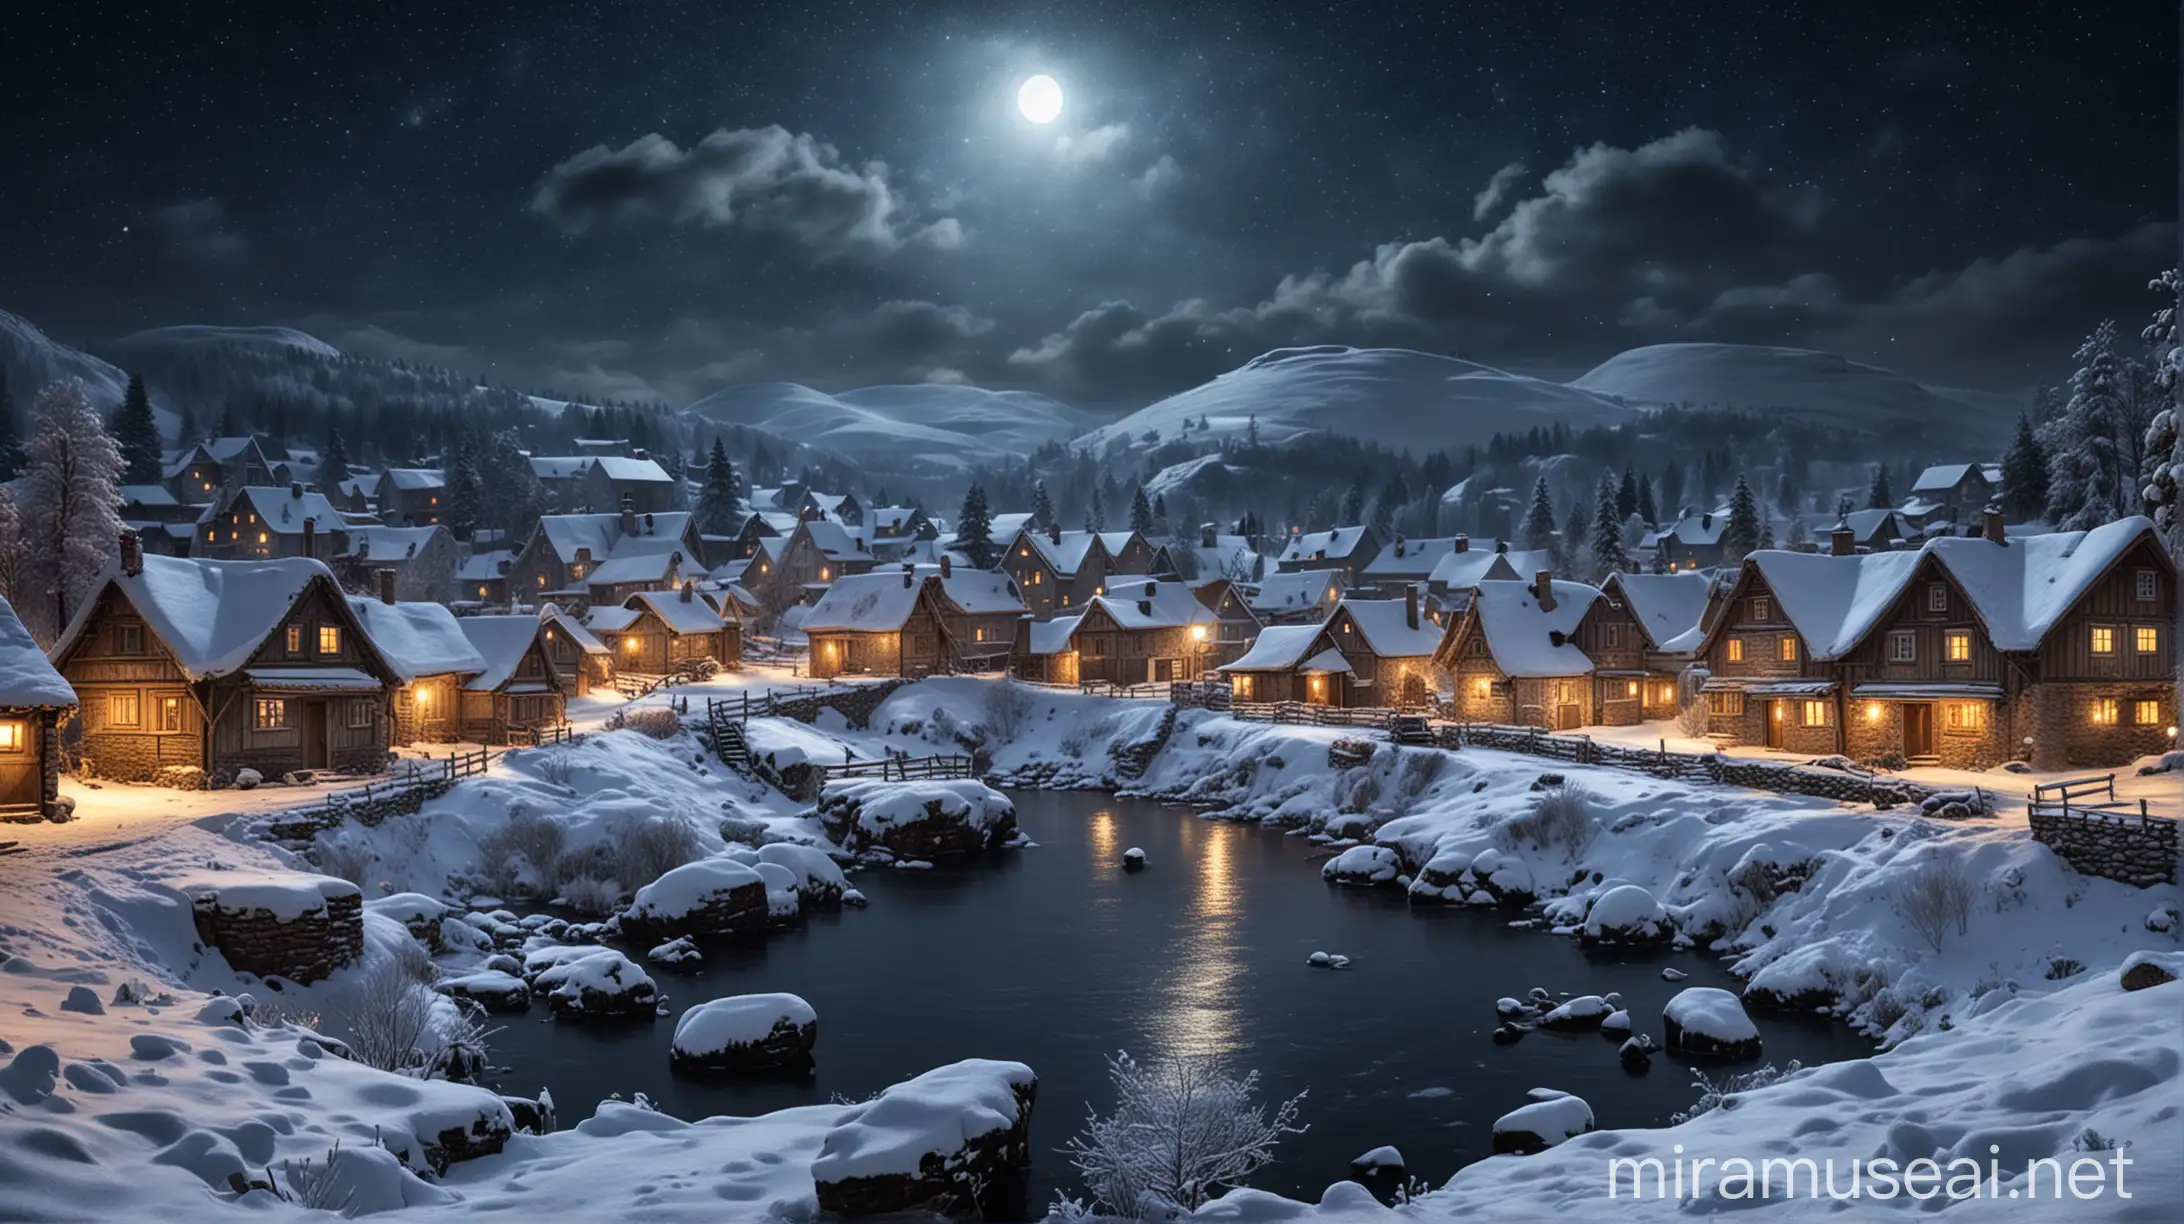 Snowy Night Village Landscape Cozy Cottages and Glistening Snowfall